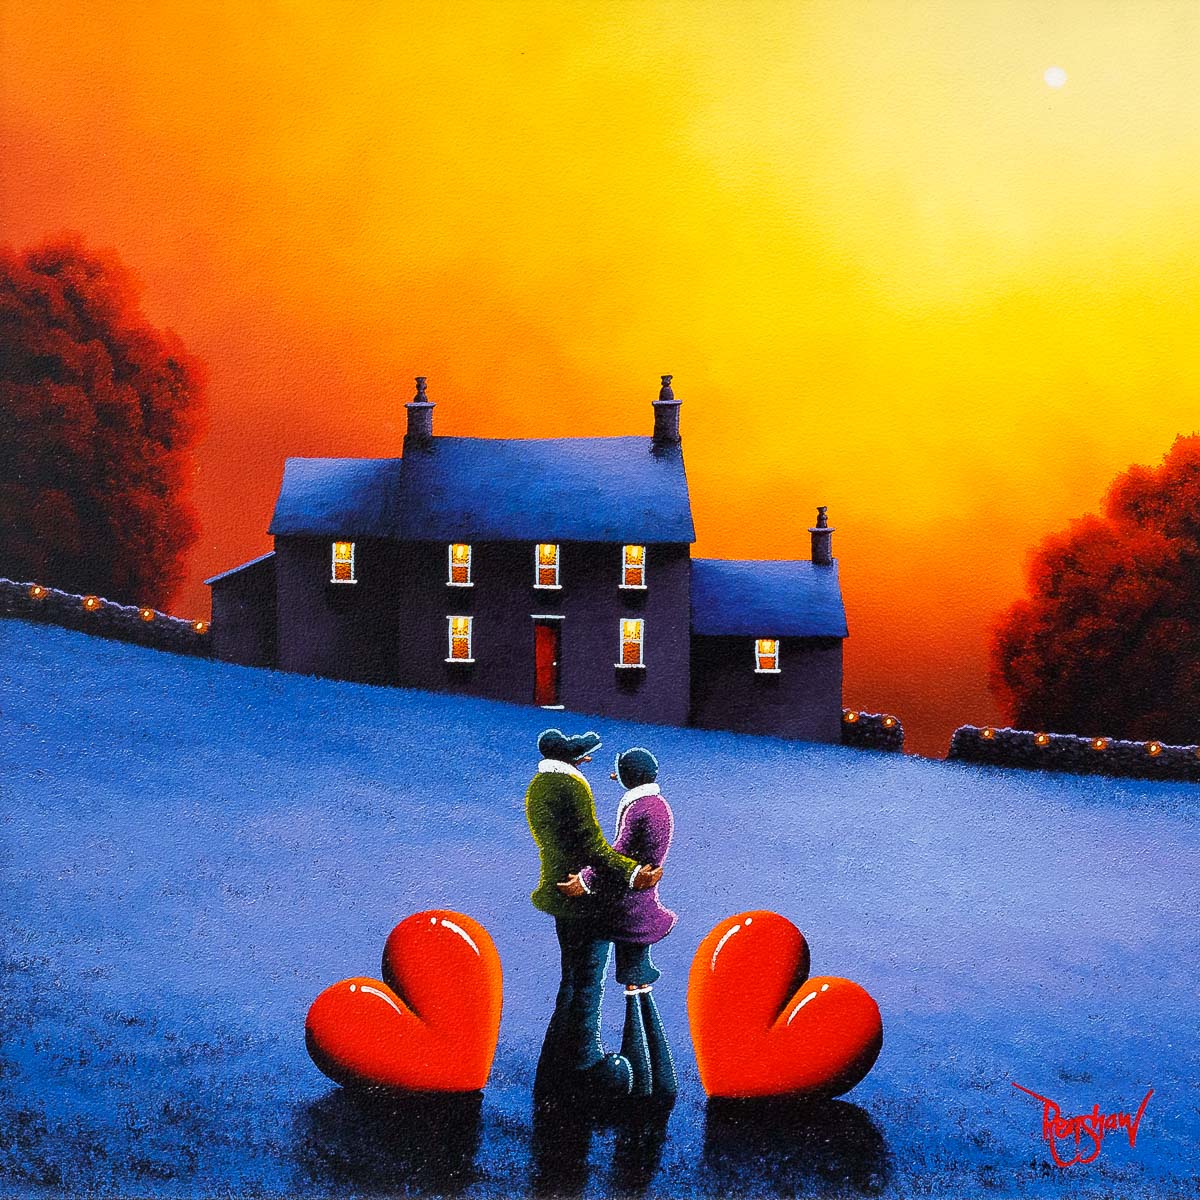 In Perfect Harmony With You - Original David Renshaw Framed